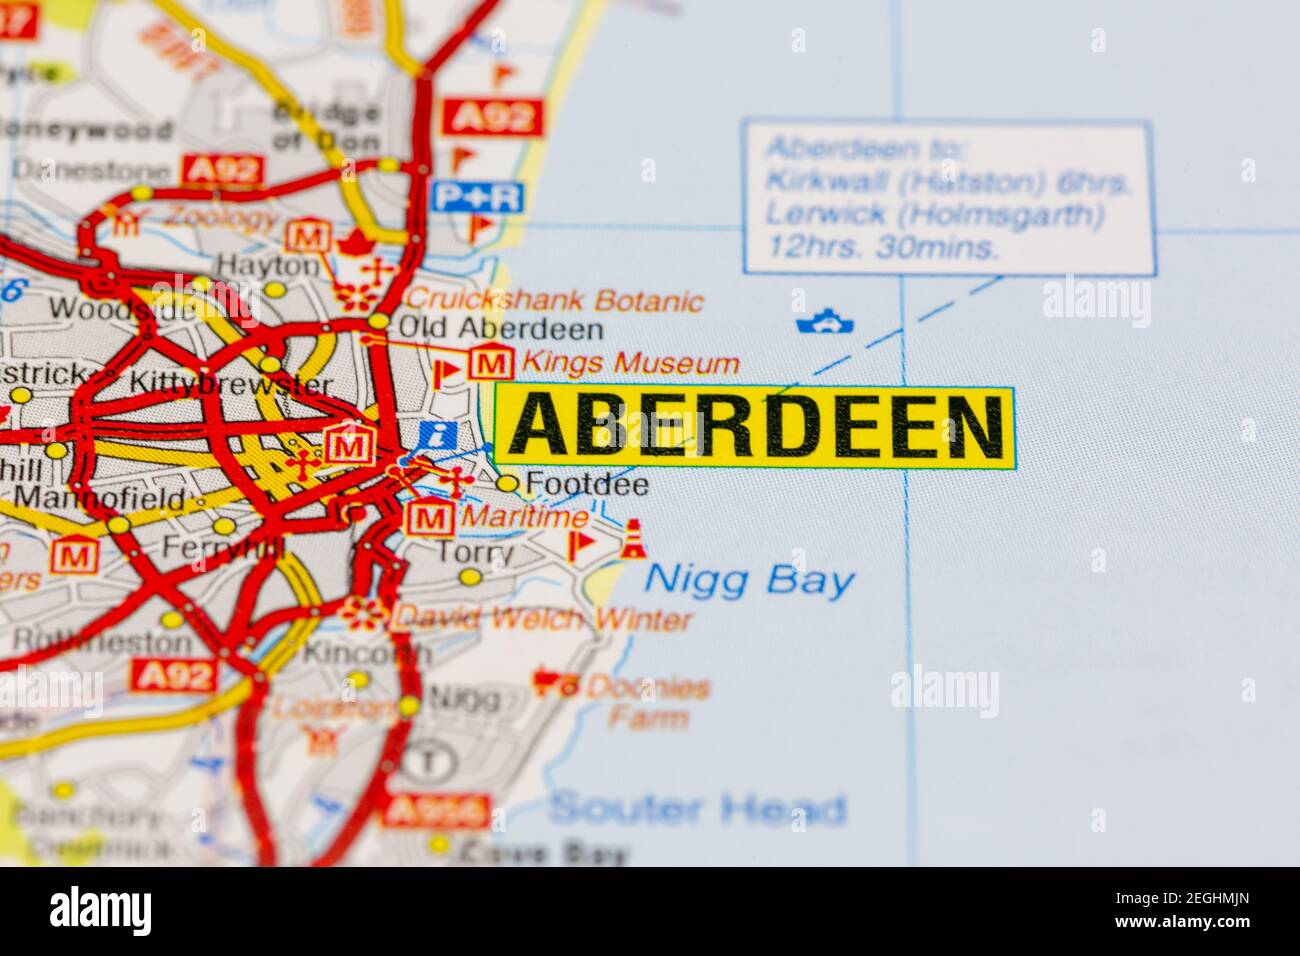 Aberdeen and surrounding areas shown on a road map or geography map Stock Photo